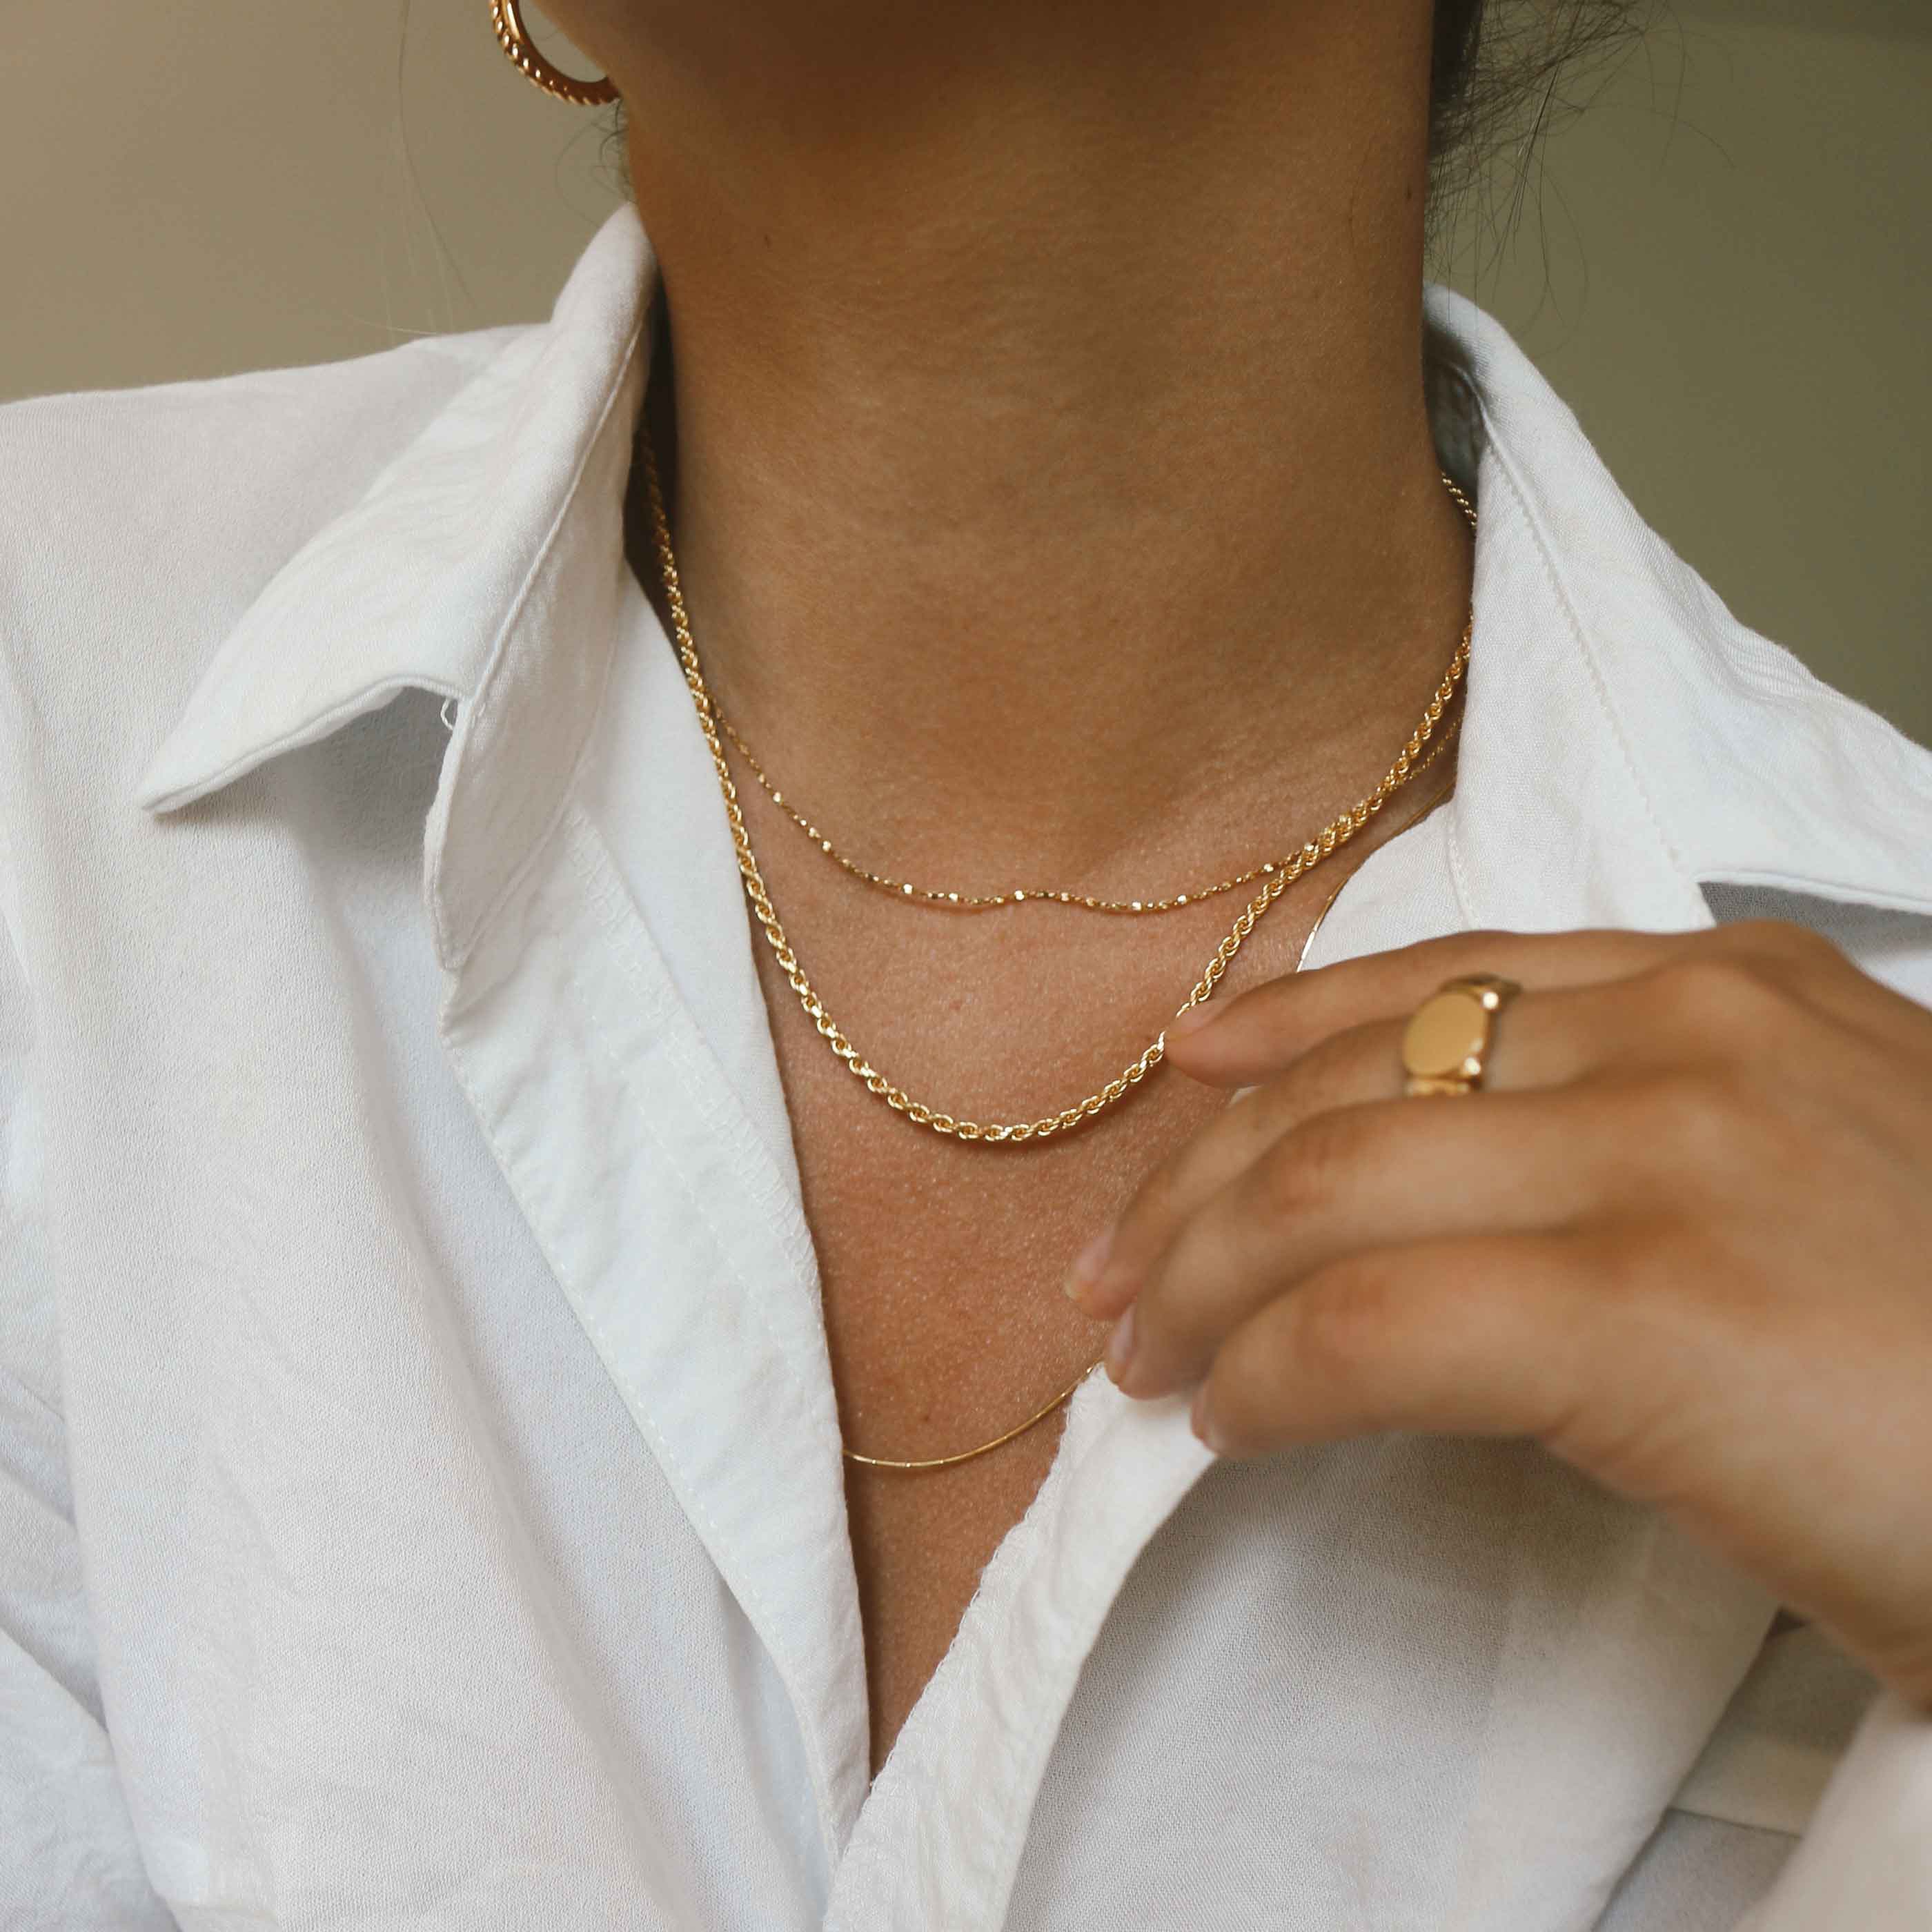 Tennis Chain Necklace in Gold - 38-43 cm | Jewellery by Astrid & Miyu